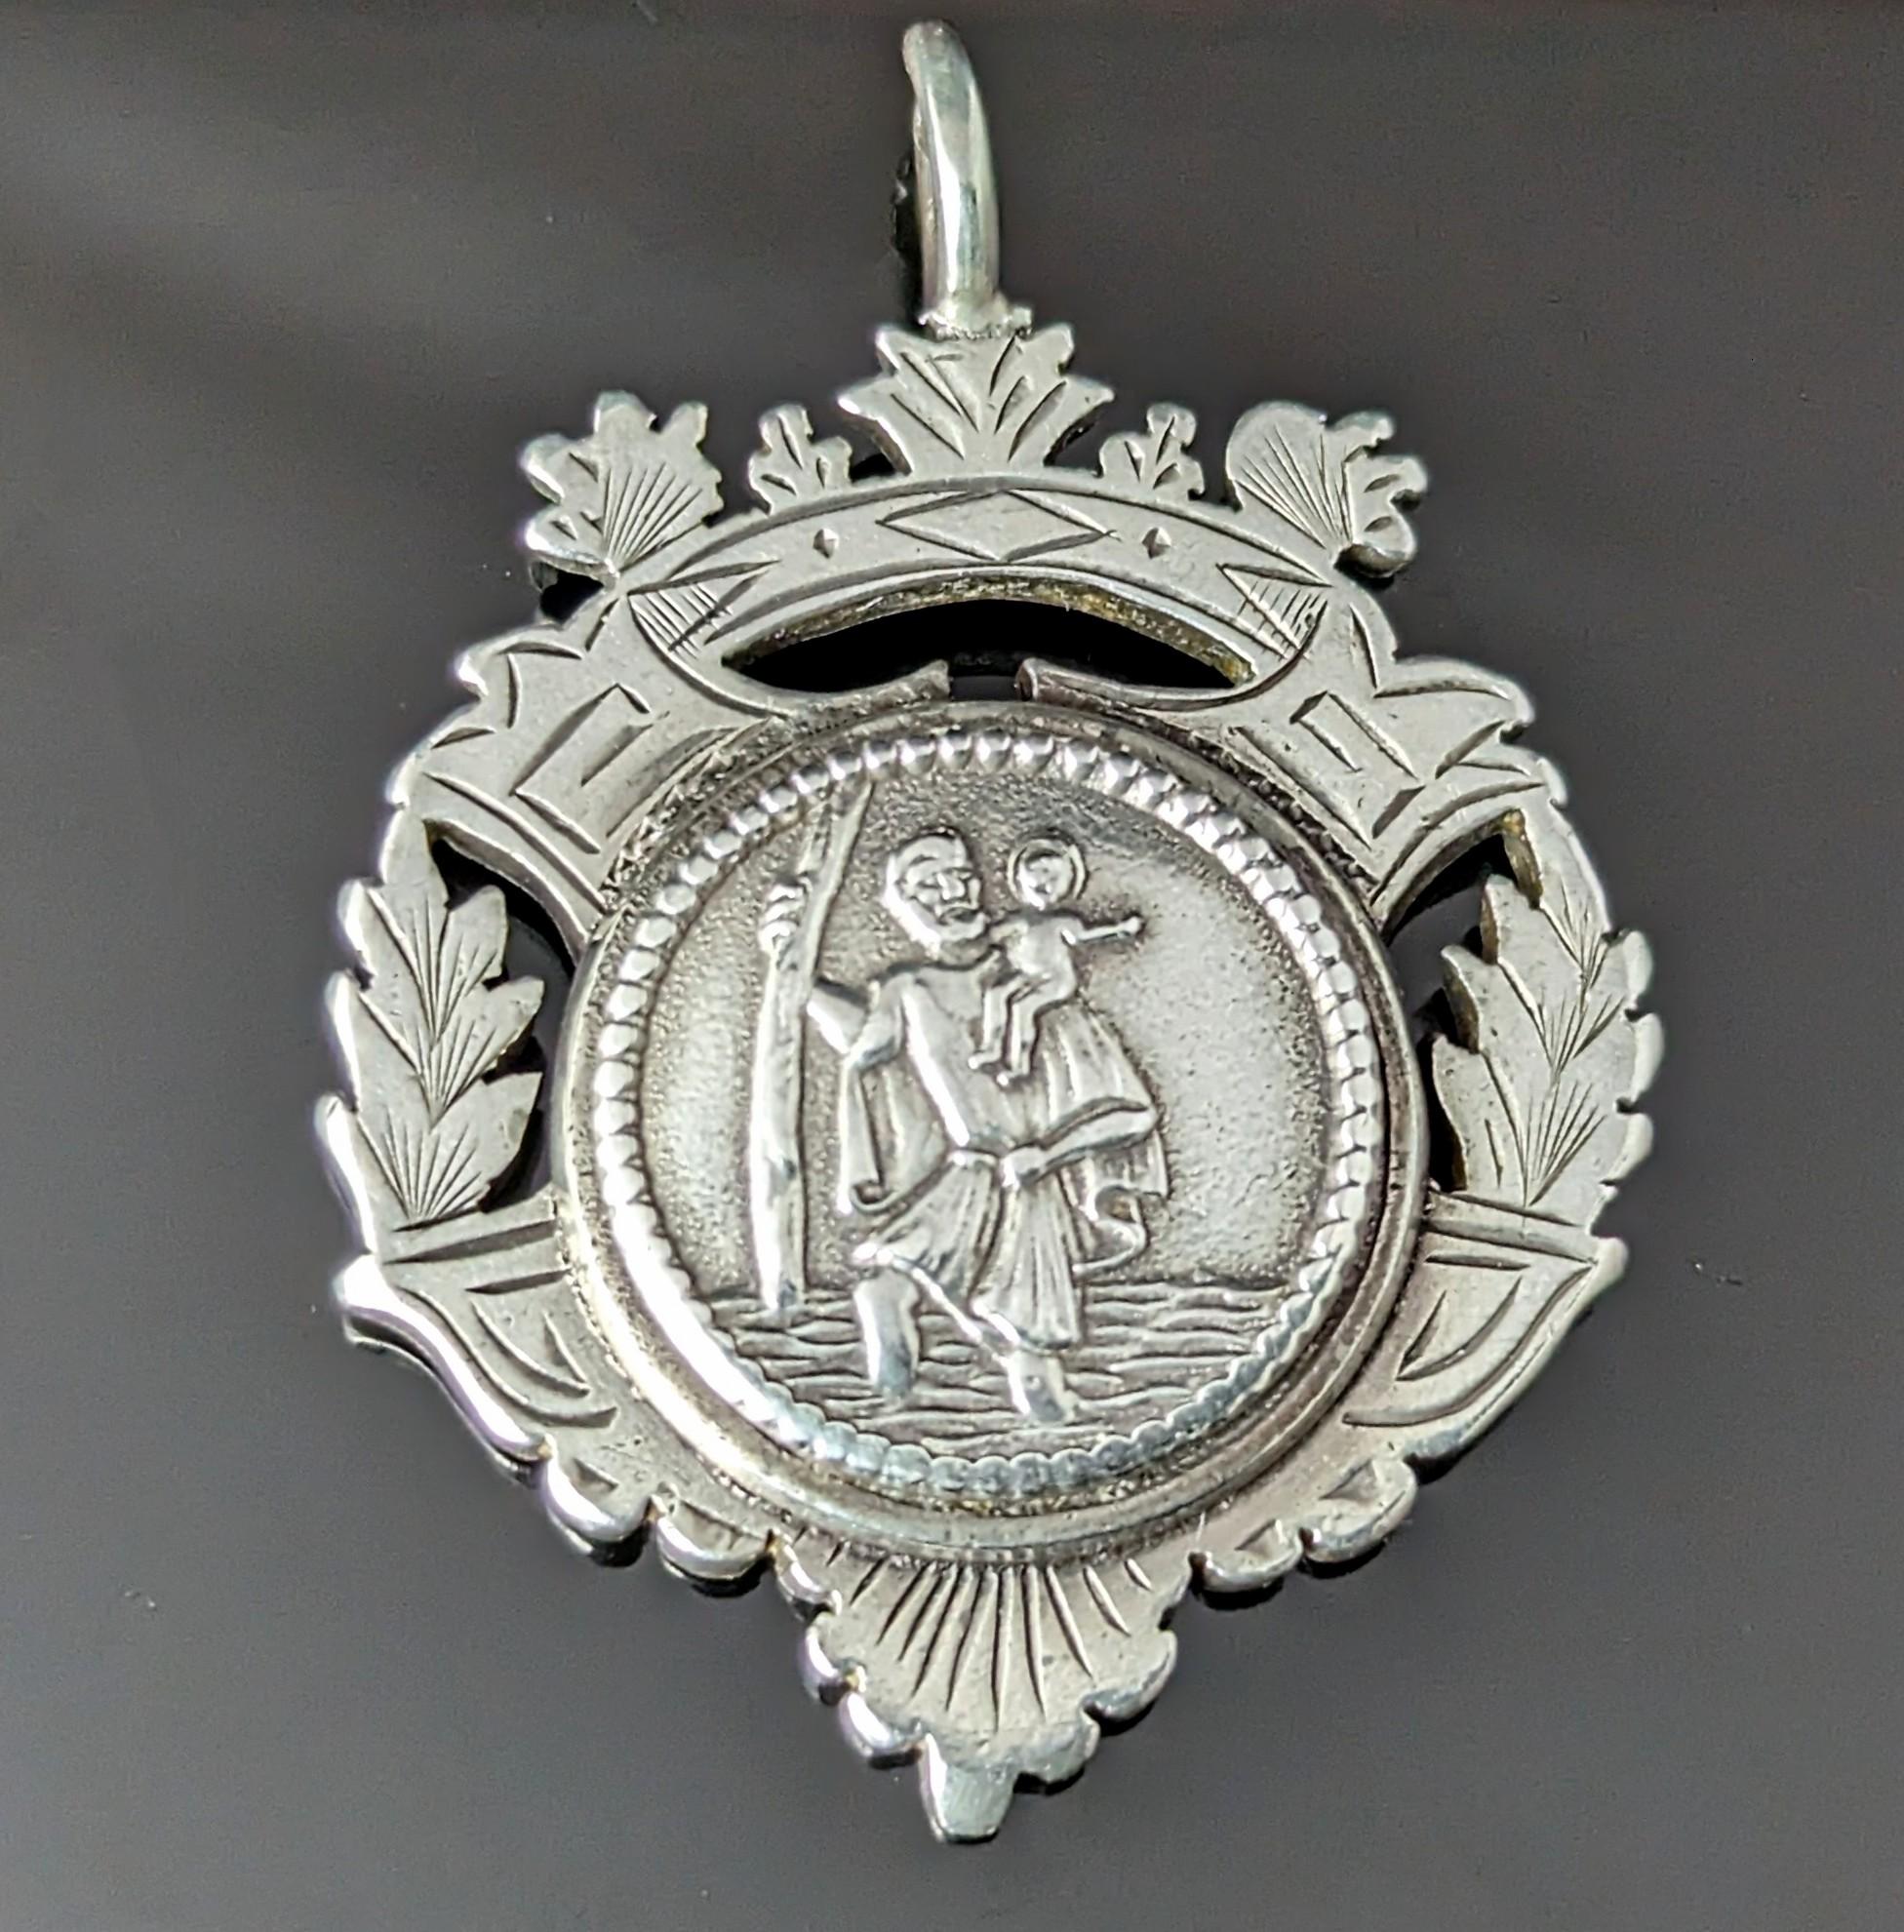 An interesting antique Victorian sterling silver watch fob pendant.

It is a large fob and quite heavy too, it depicts the famous St Christopher image of the saint carrying a child across the mighty river, the patron saint of all travellers.

This